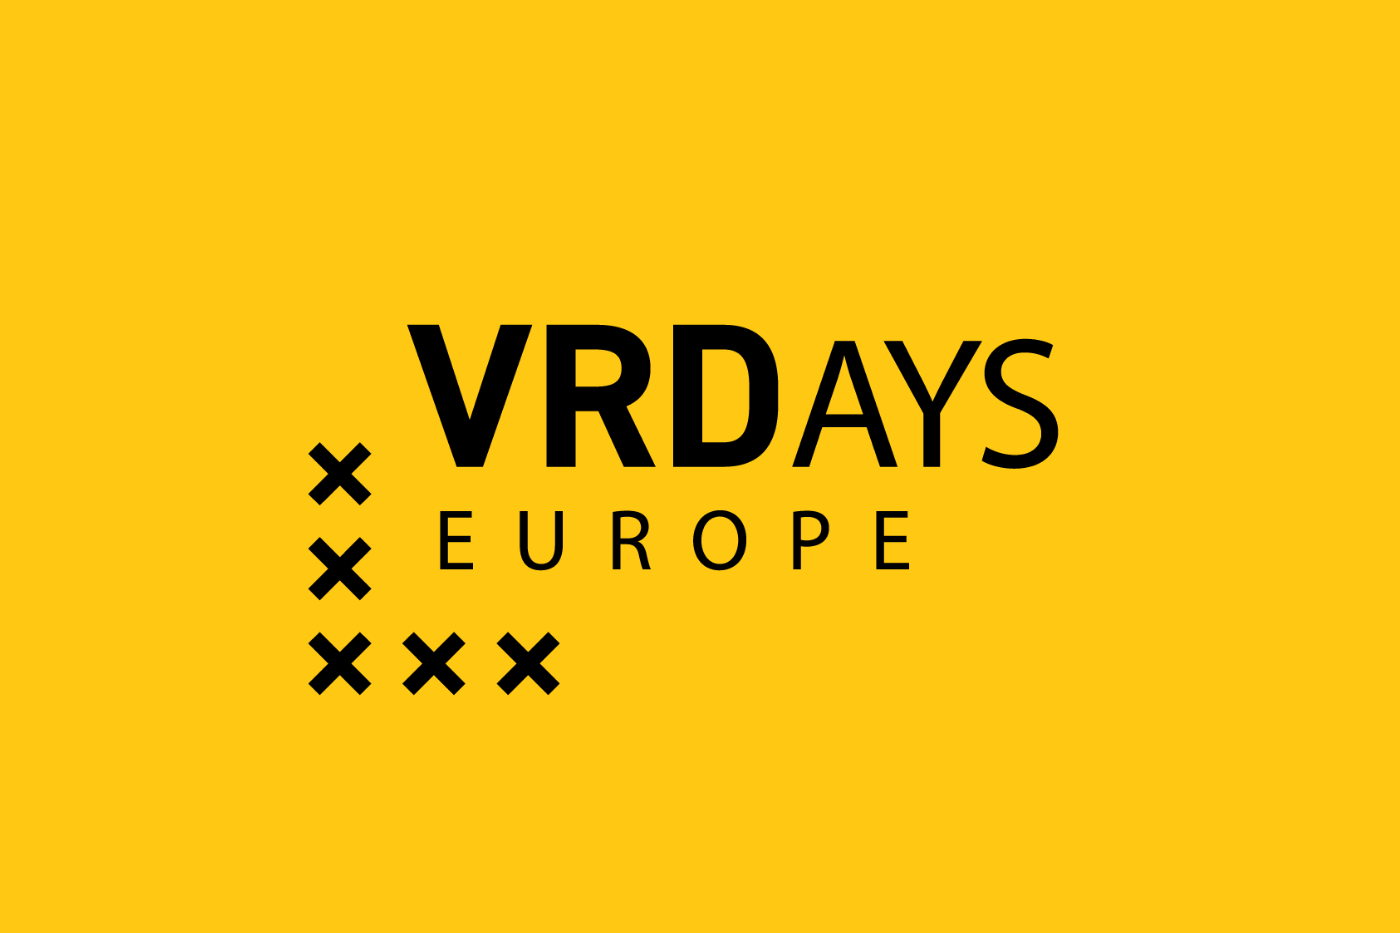 VRDays Europe - Speakers, Events, and Ticket Information